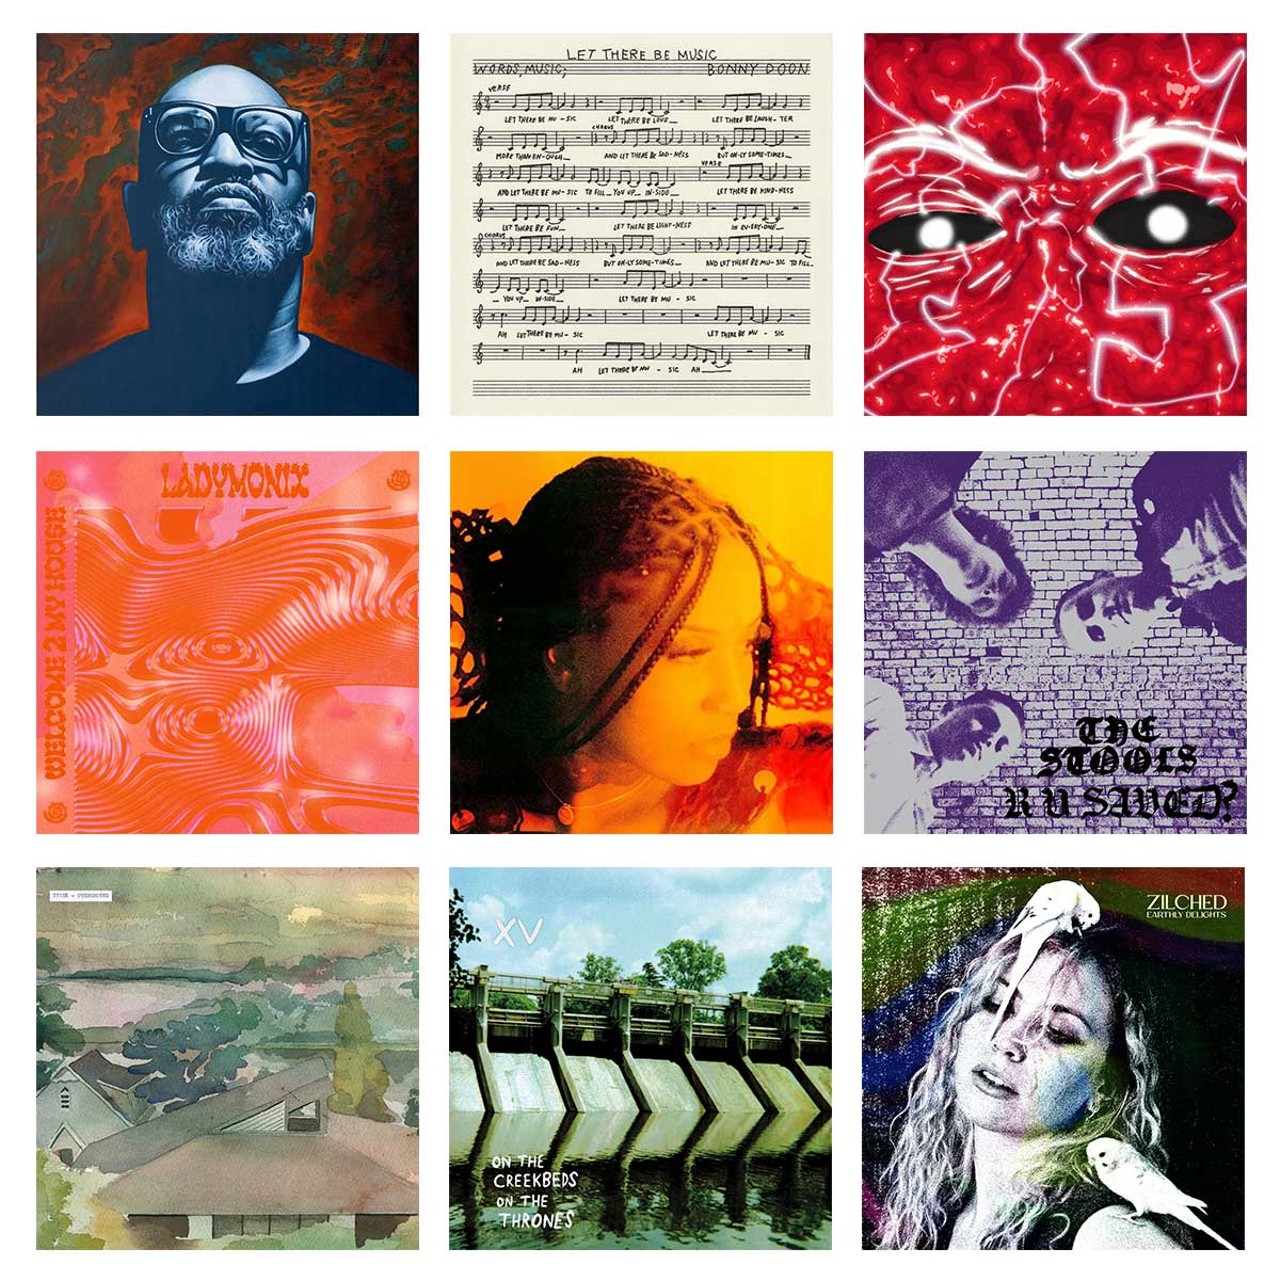 Honorable mentions: Andrés ANDR​É​S V, Bonny Doon Let There Be Music, Gulley Gesicht, Ladymonix Welcome 2 My House EP, Milfie Very Pretty EP, The Stools R U Saved?, Tyvek&nbsp; Overground, XV On the Creekbeds On The Thrones, Zilched Earthly Delights.